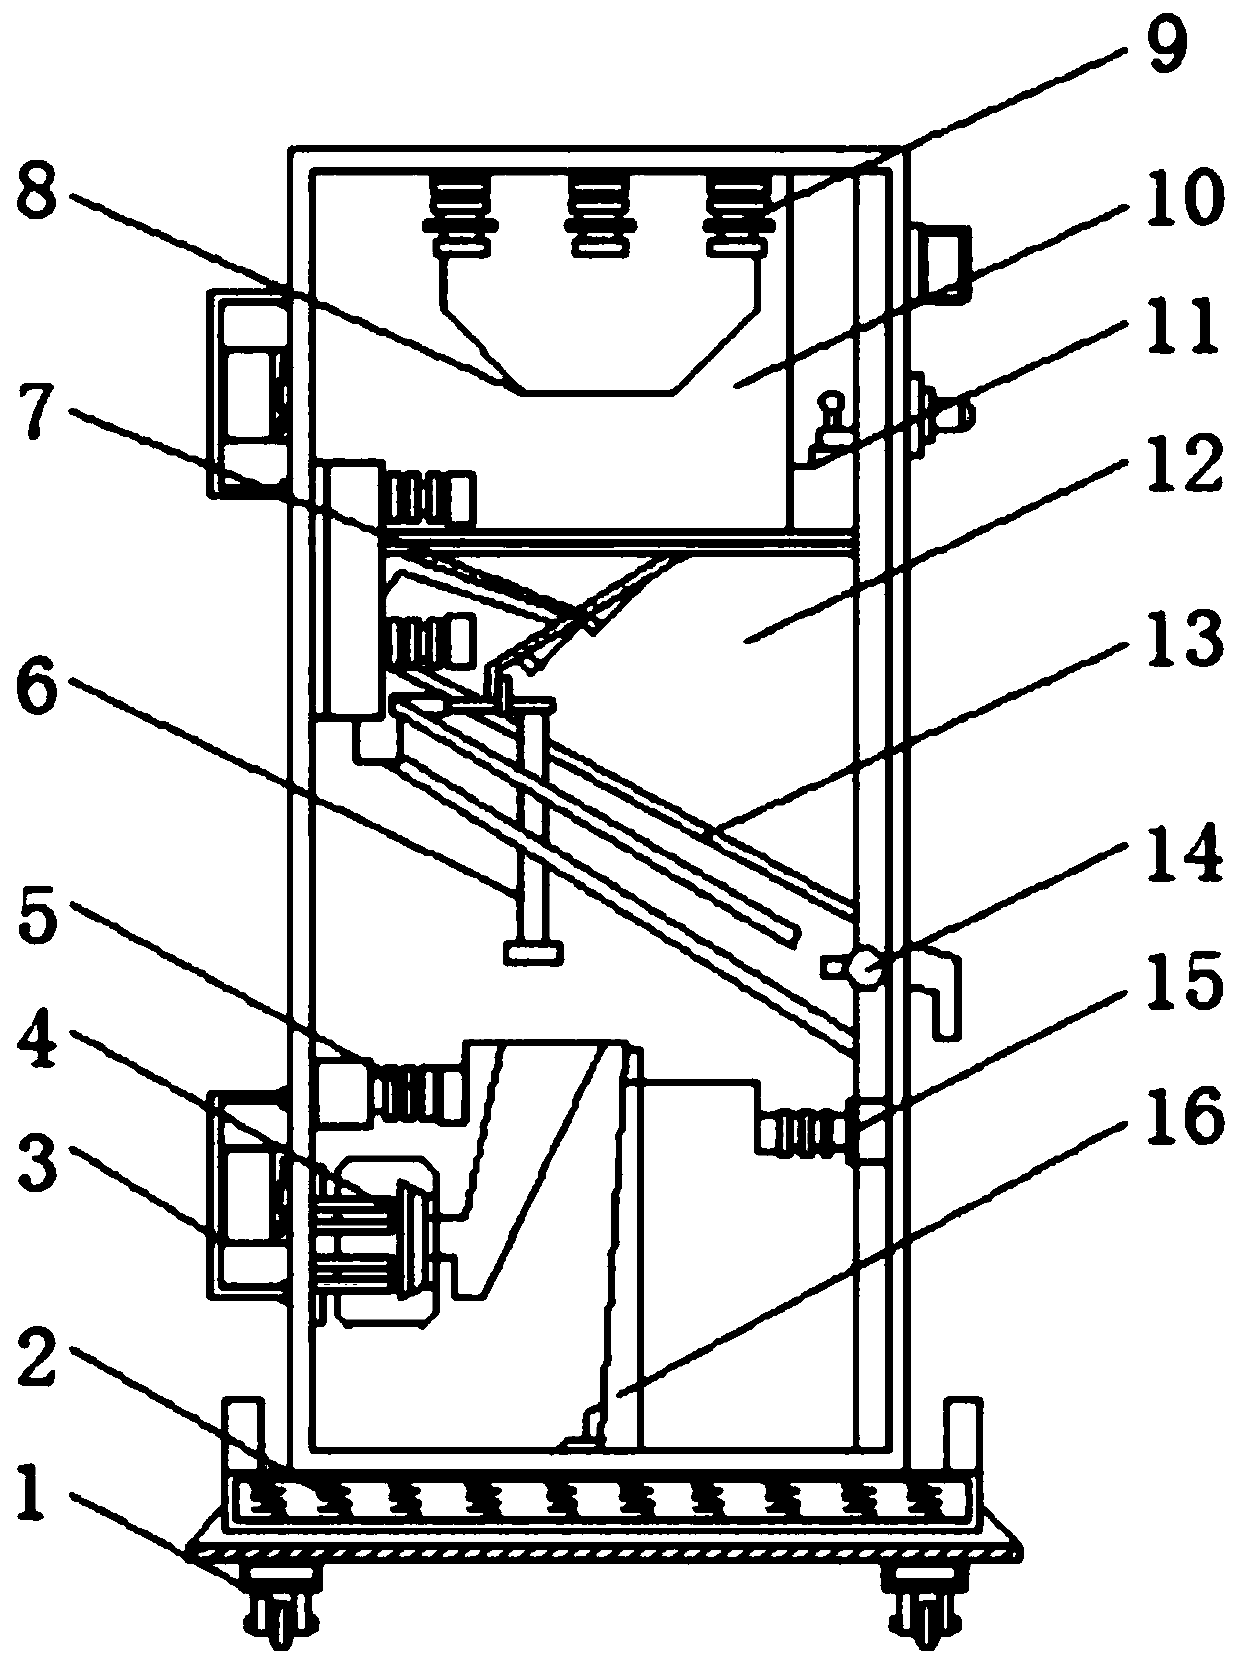 Combined solid insulated switchgear